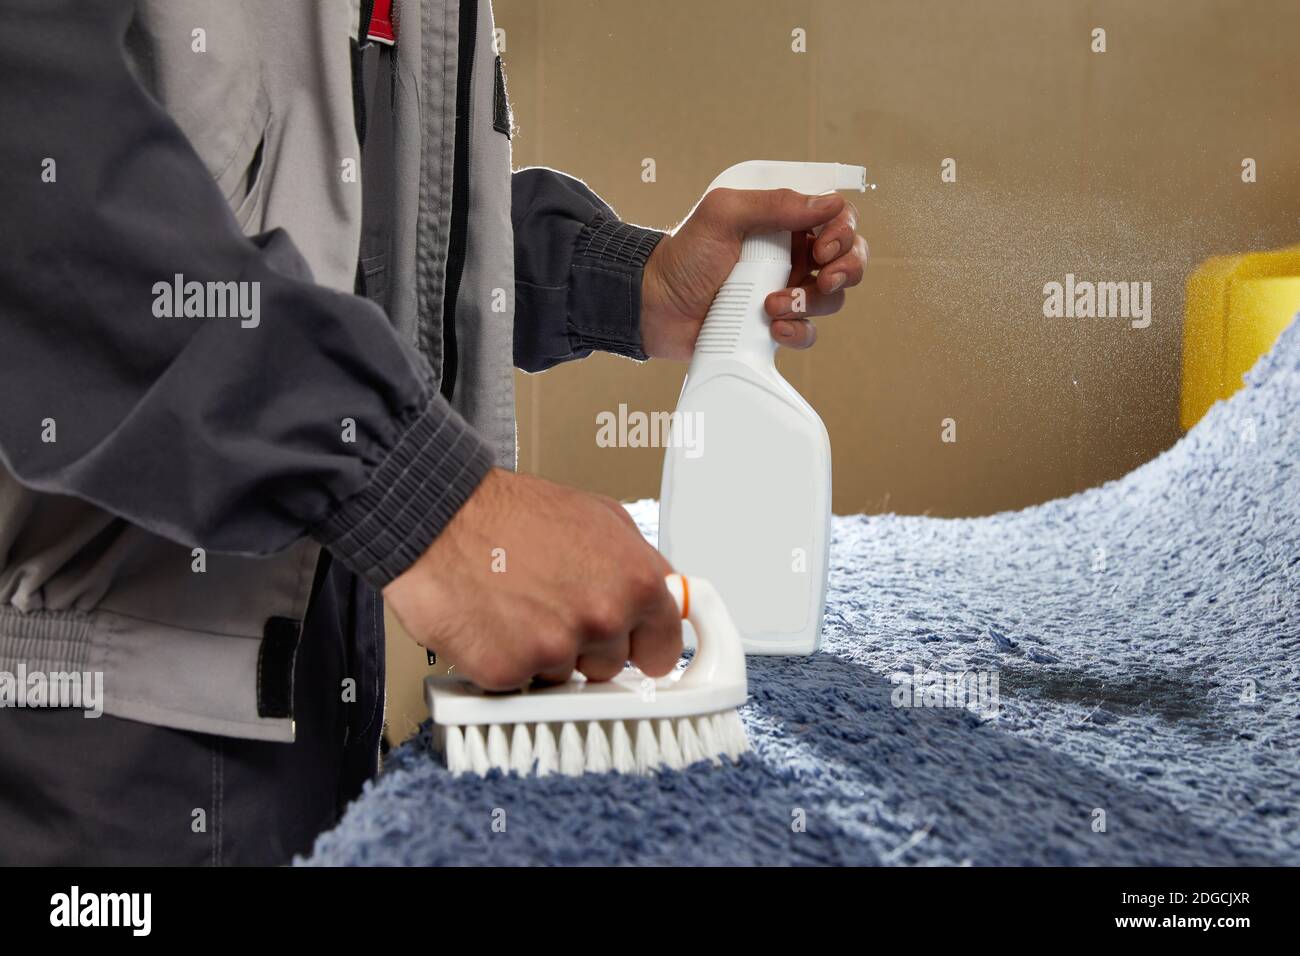 Man Spraying Detergent On Grey Carpet To Remove Stain in professional cleaning service  Stock Photo